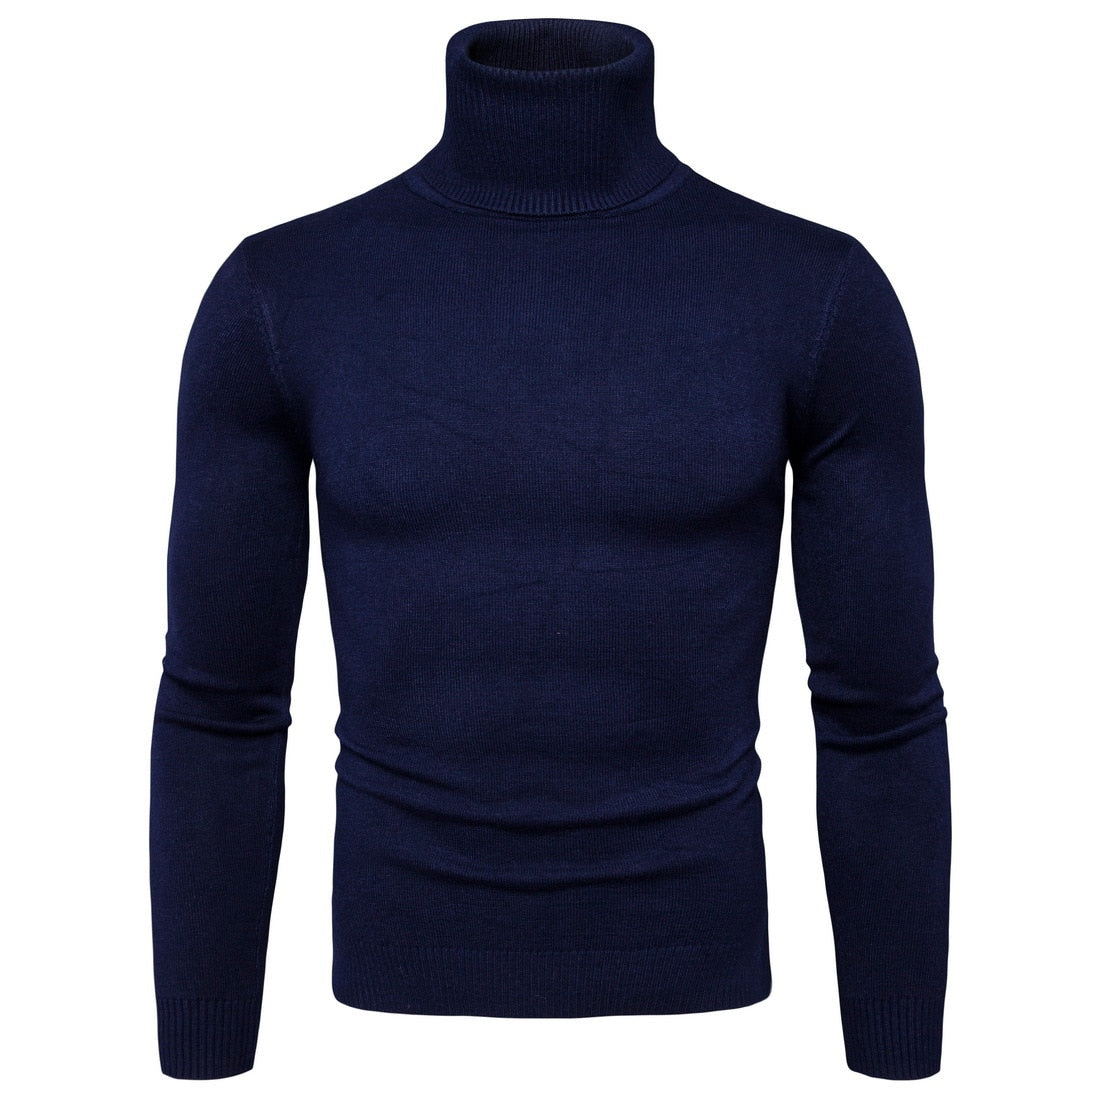 FAVOCENT Winter Warm Turtleneck Sweater Men Fashion Solid Knitted Mens Sweaters 2020 Casual Male Double Collar Slim Fit Pullover